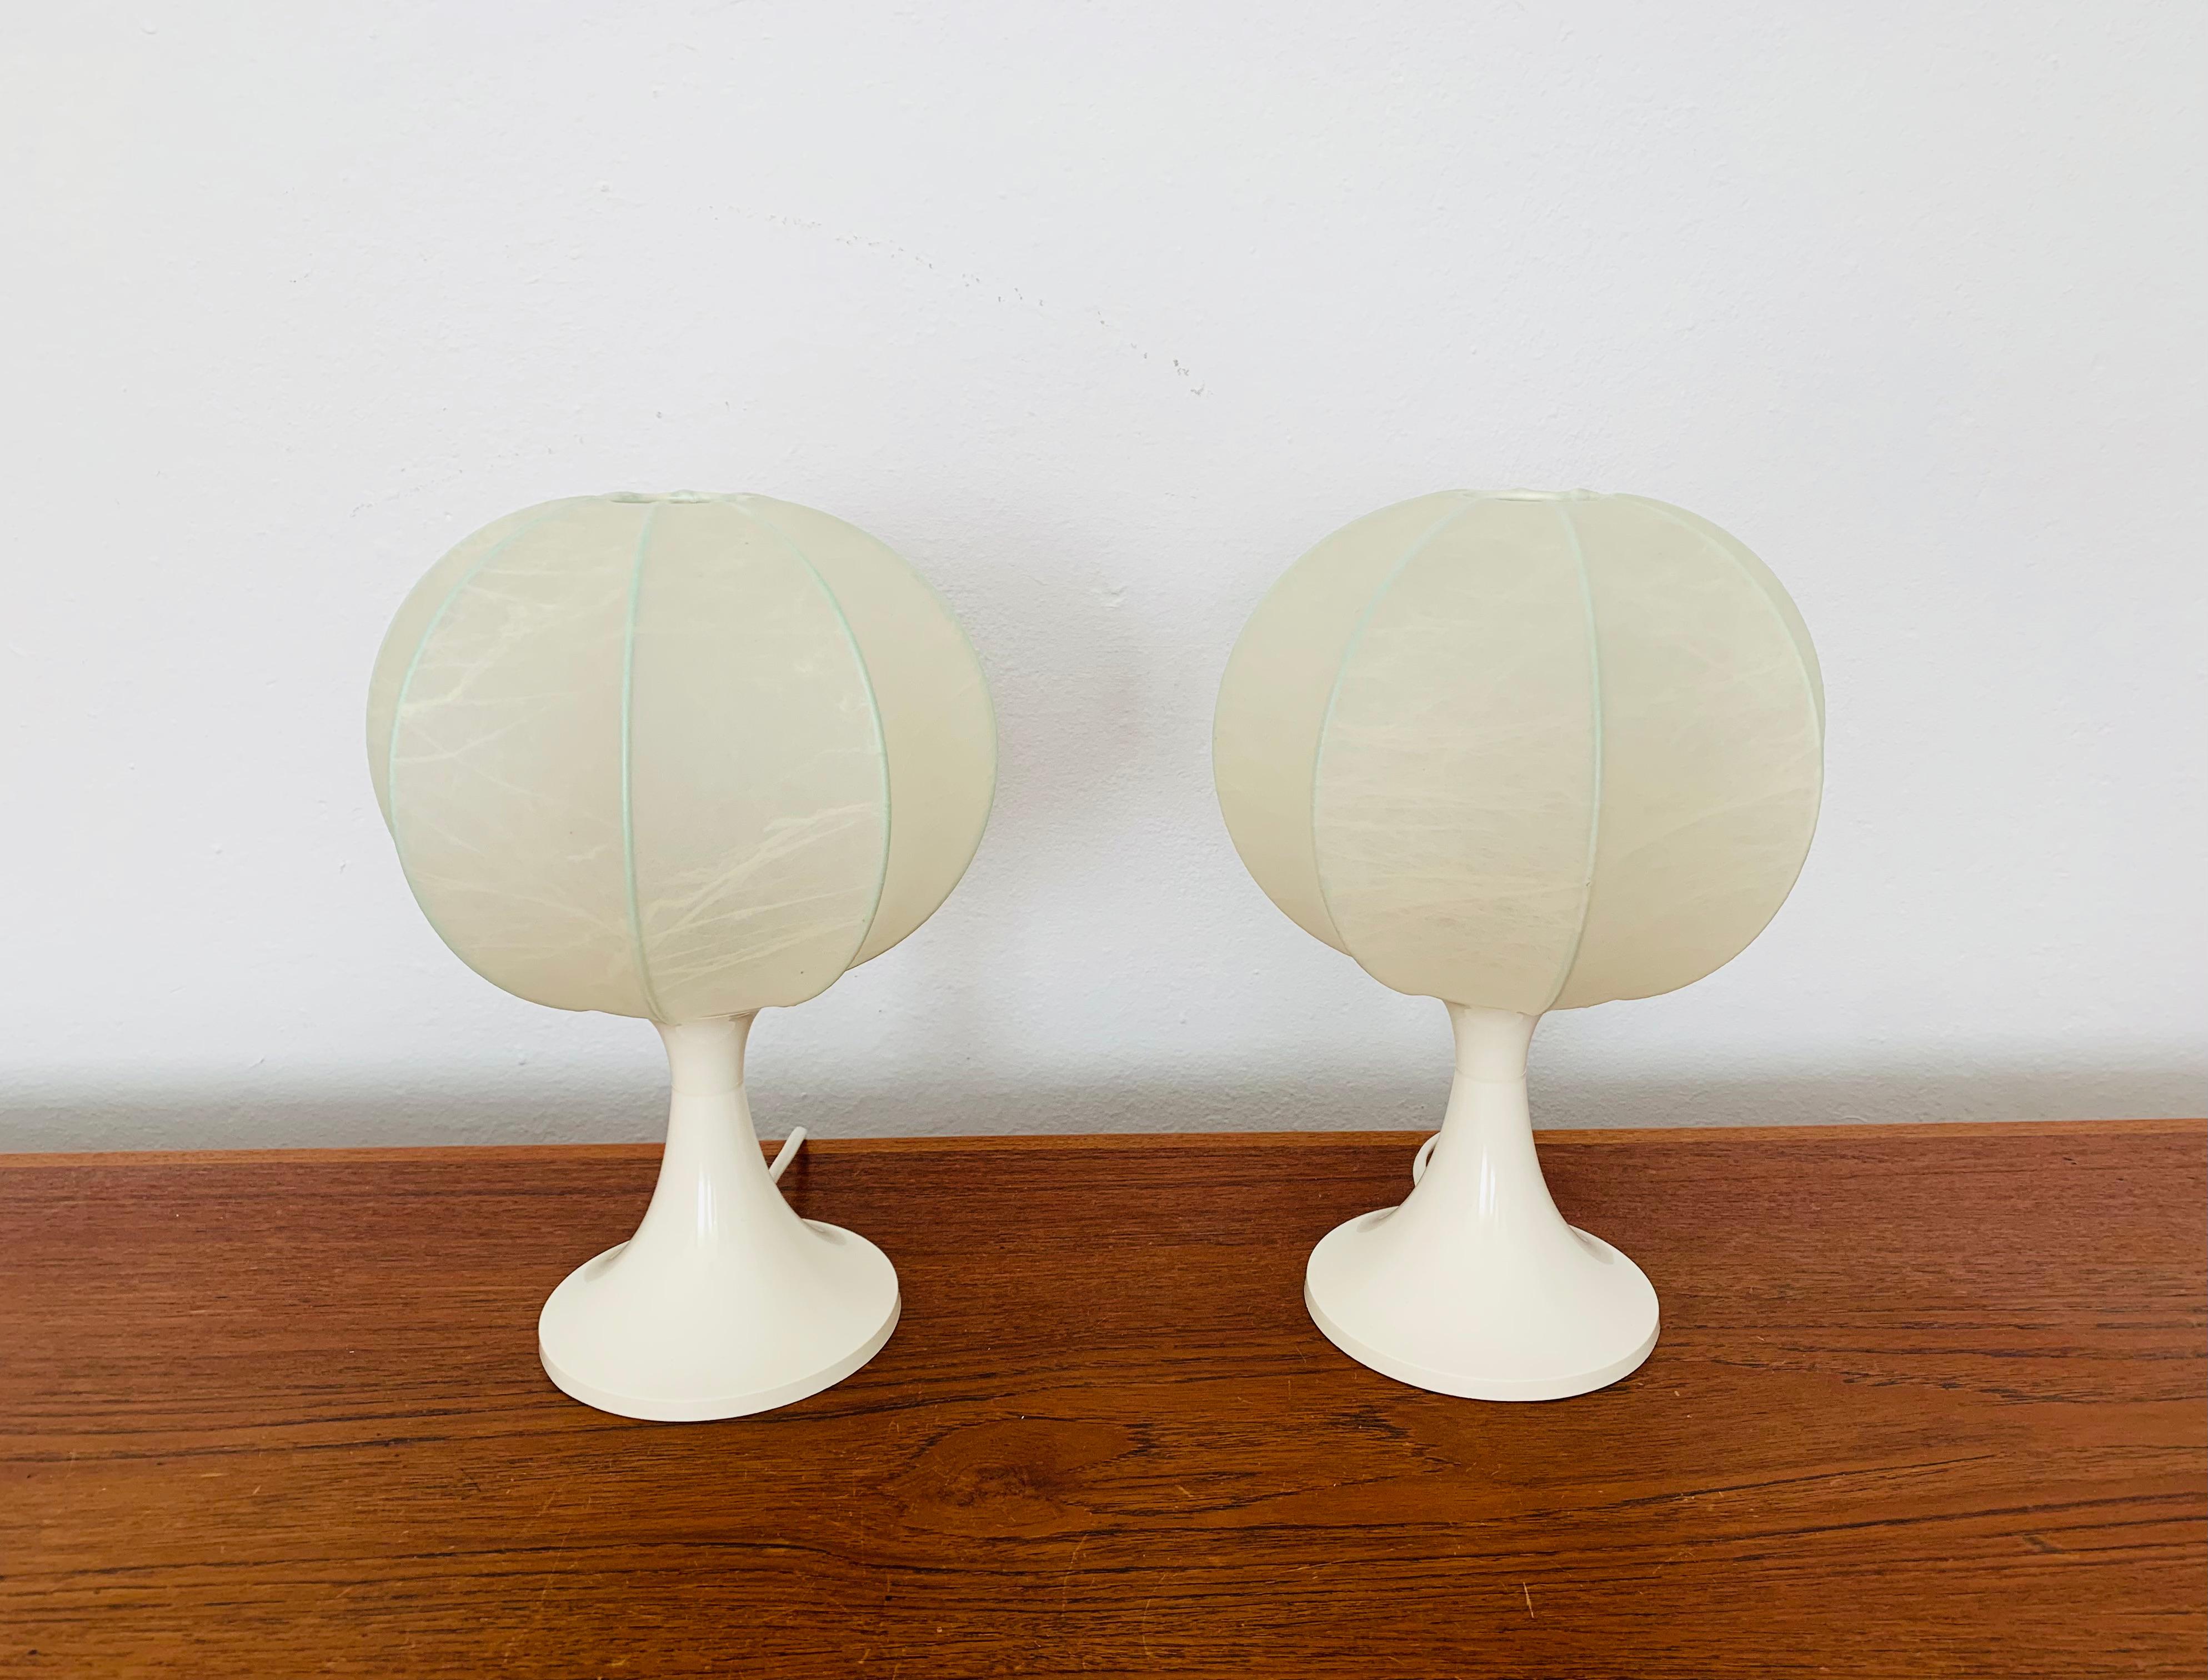 Very nice pair of small Cocoon table lamps from the 1950s.
The beautiful structure creates a warm and very cozy light.
Wonderful design and an asset to any home.

Condition:

Very good vintage condition with slight signs of wear consistent